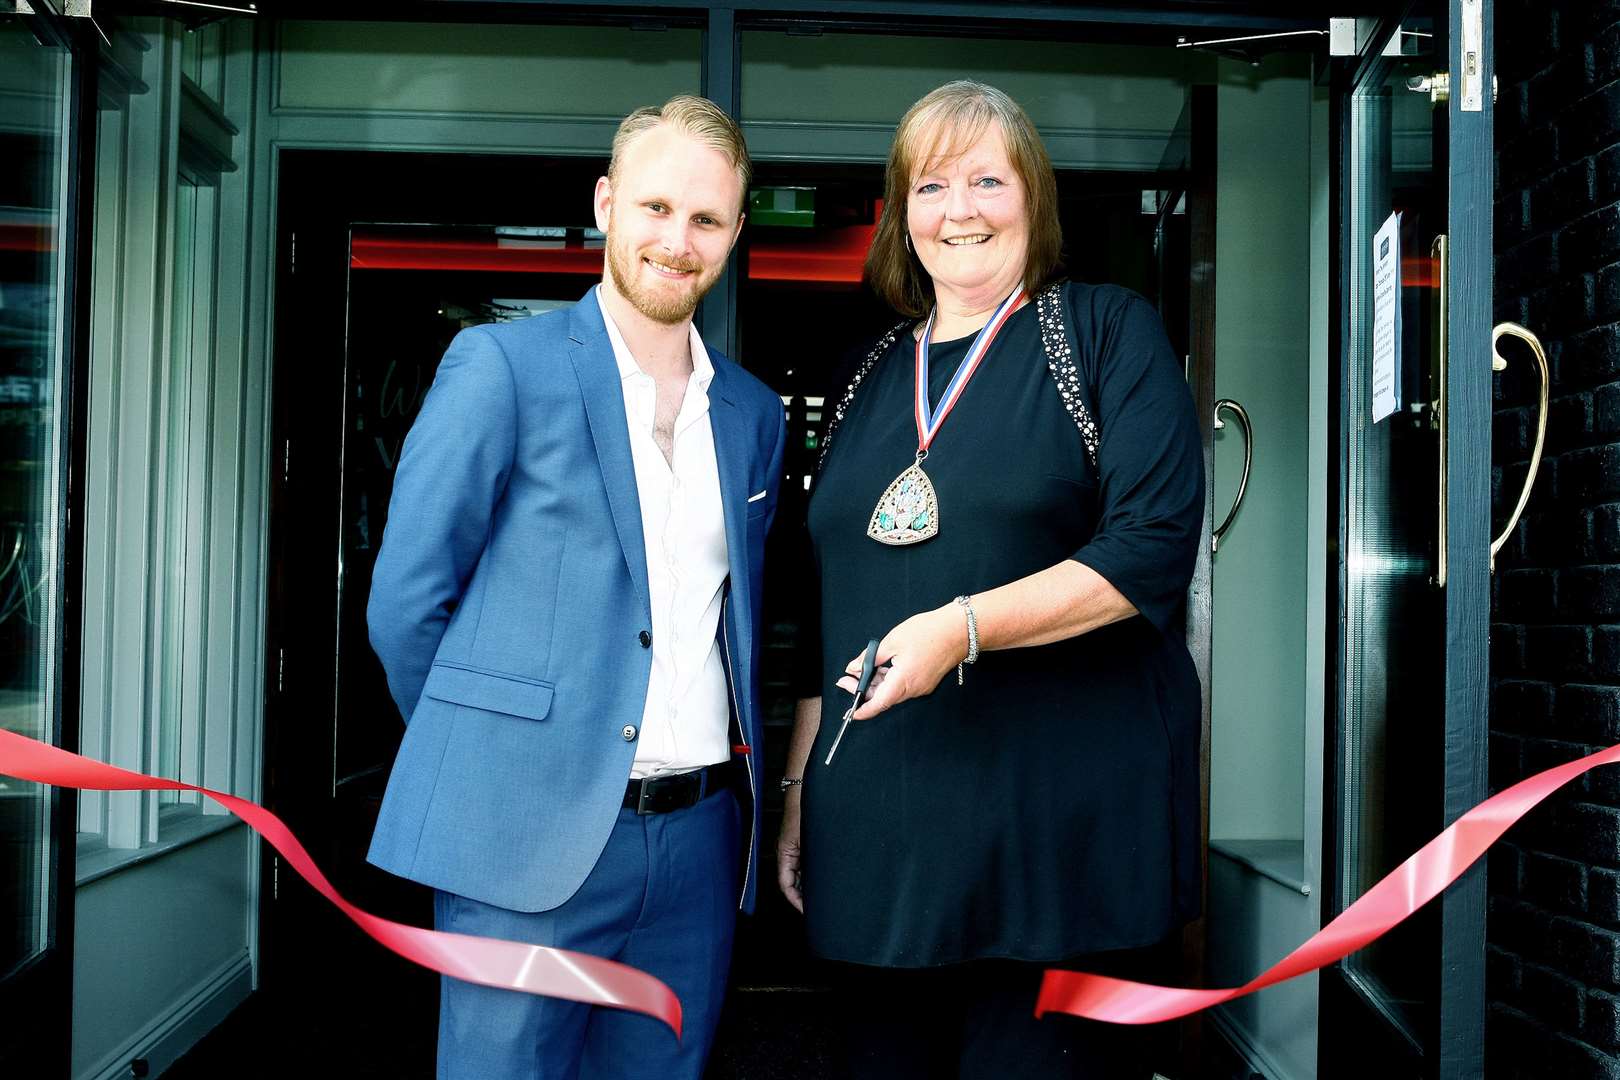 The Vineyard's general manager Ben Malyan with deputy Mayor of Swale Cllr Lesley Ingham